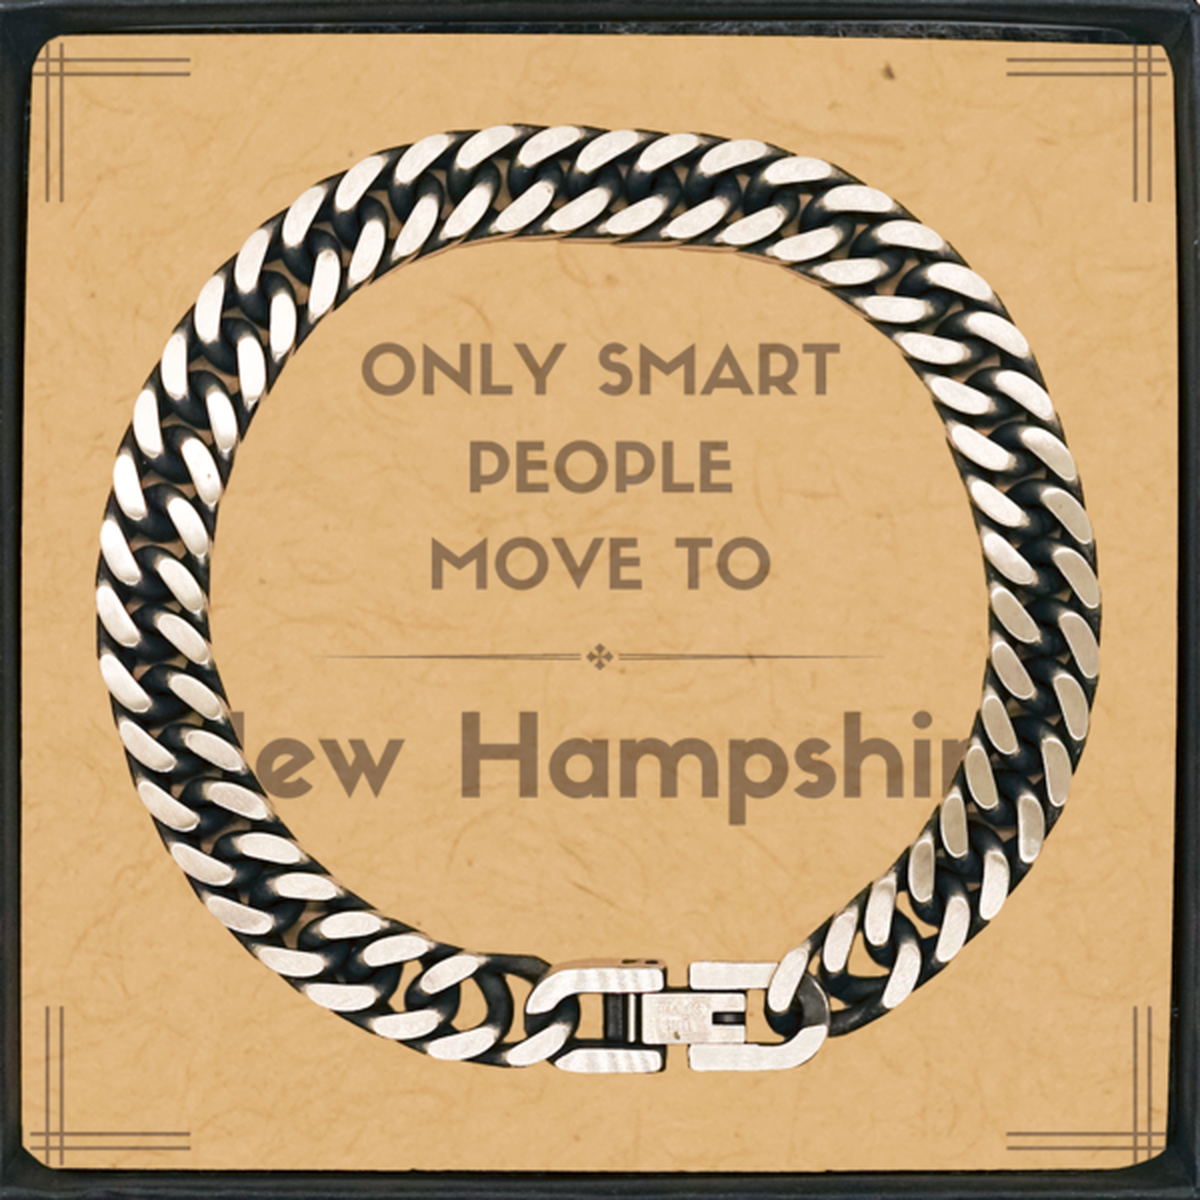 Only smart people move to New Hampshire Cuban Link Chain Bracelet, Message Card Gifts For New Hampshire, Move to New Hampshire Gifts for Friends Coworker Funny Saying Quote